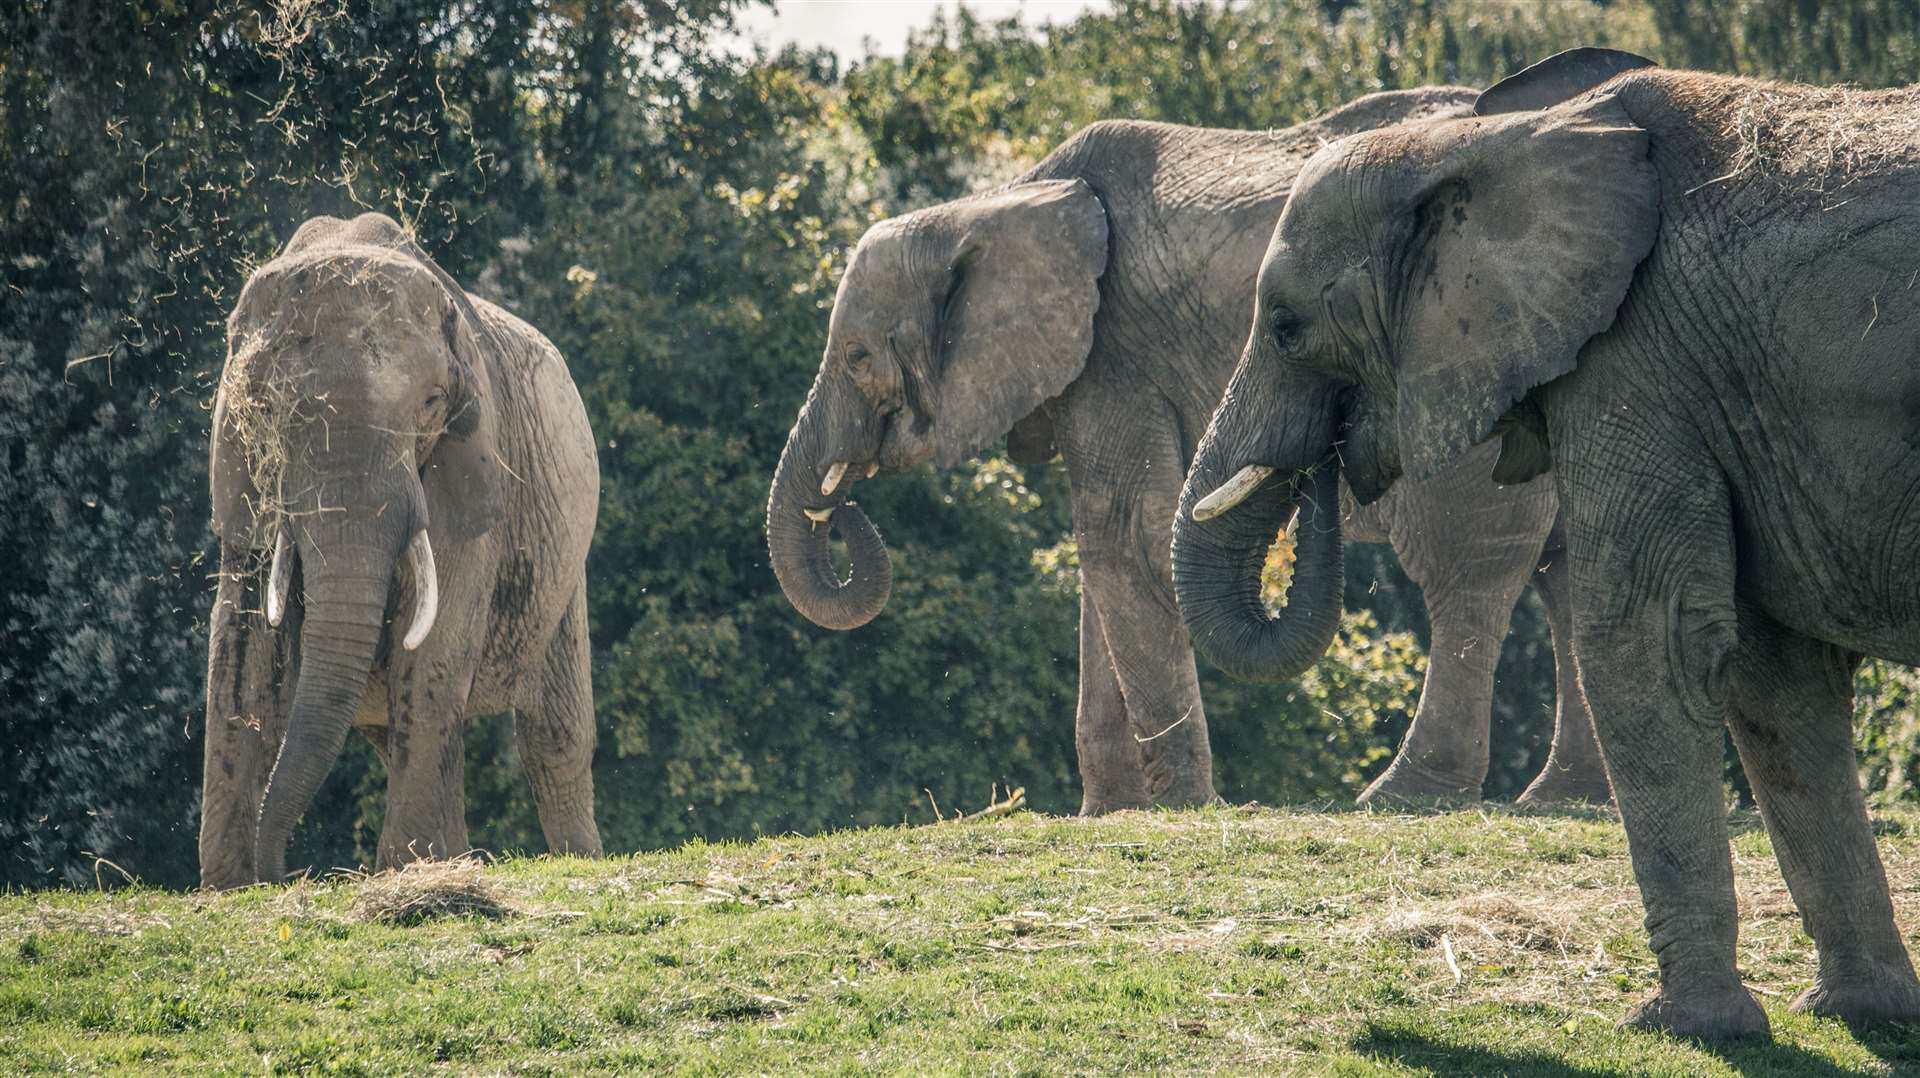 The elephant rewilding project at Howletts will be the first of its kind in the UK